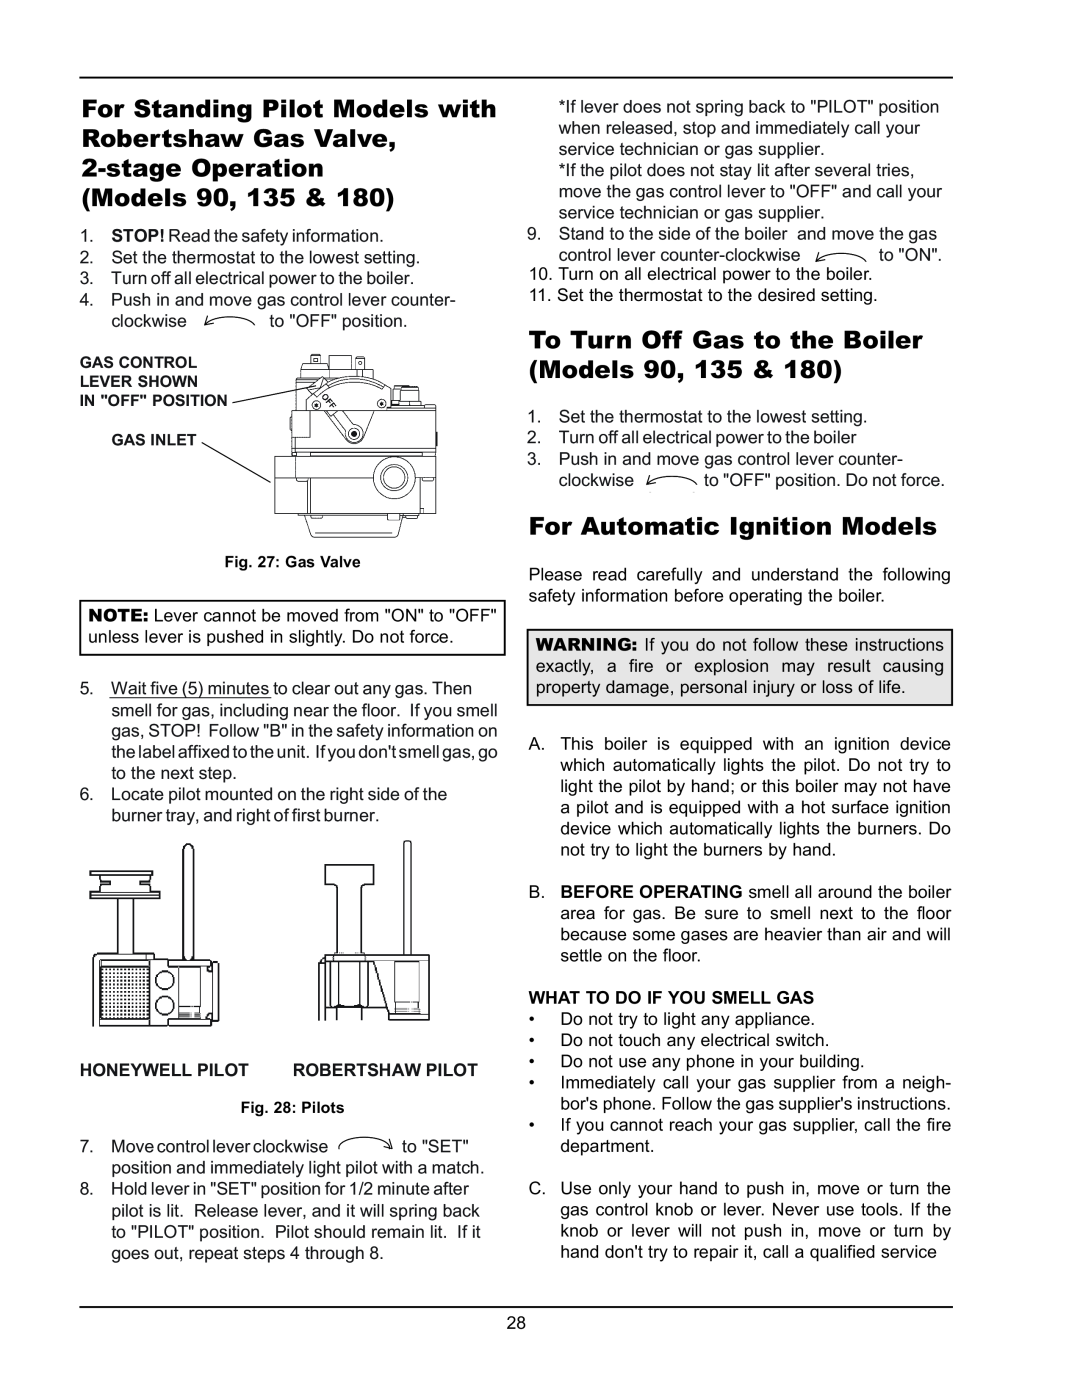 Raypak 0180B Type H manual To Turn Off Gas to the Boiler Models, For Automatic Ignition Models, Honeywell Pilot 